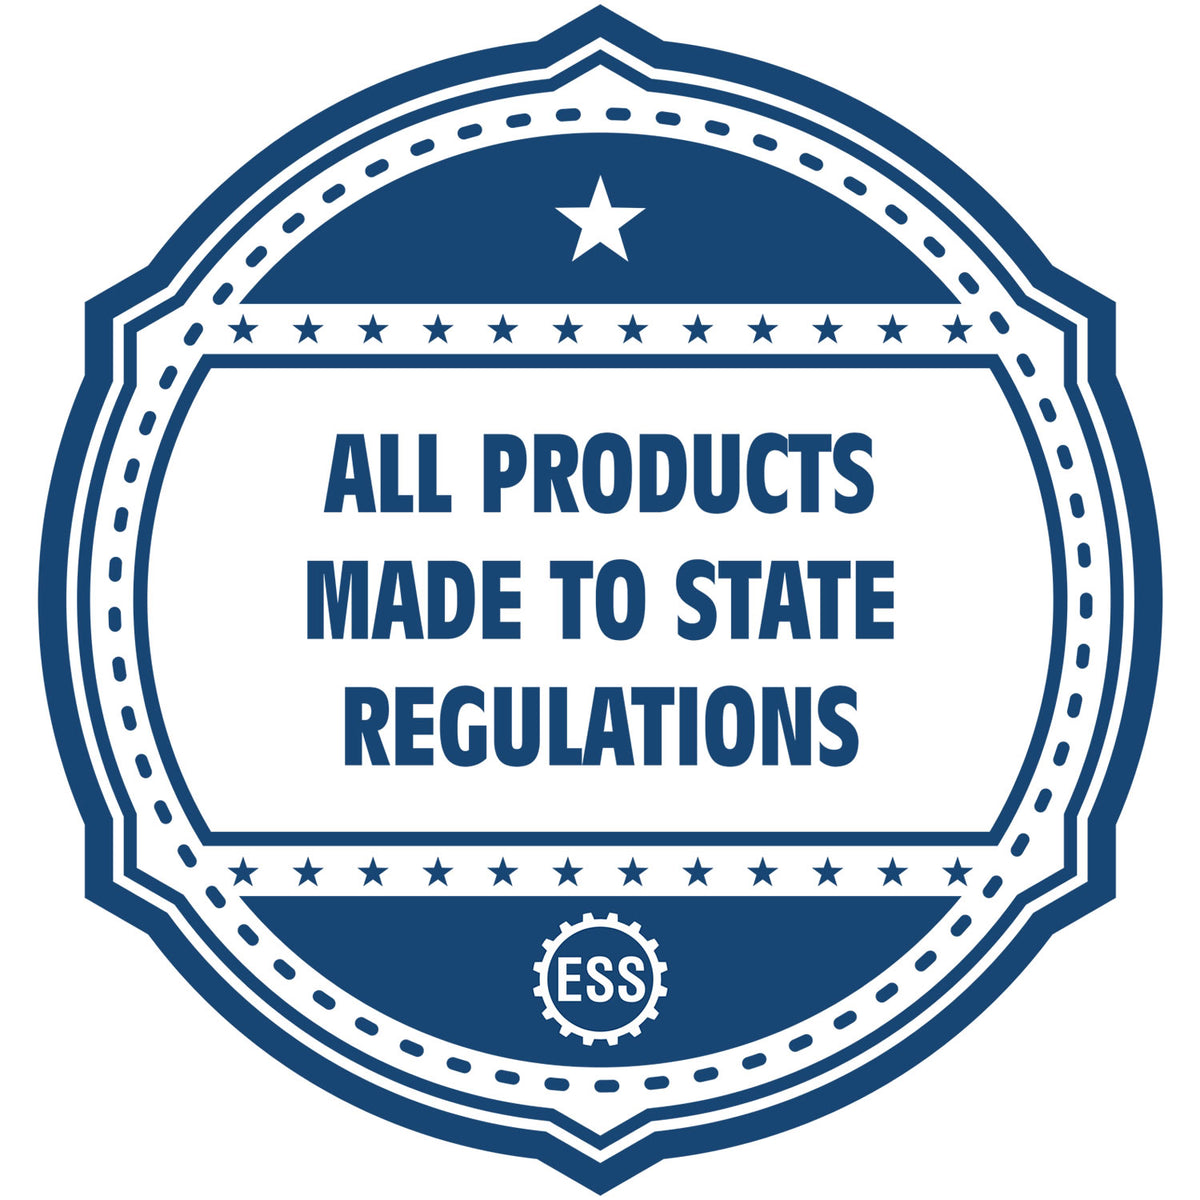 An icon or badge element for the Nebraska Desk Surveyor Seal Embosser showing that this product is made in compliance with state regulations.